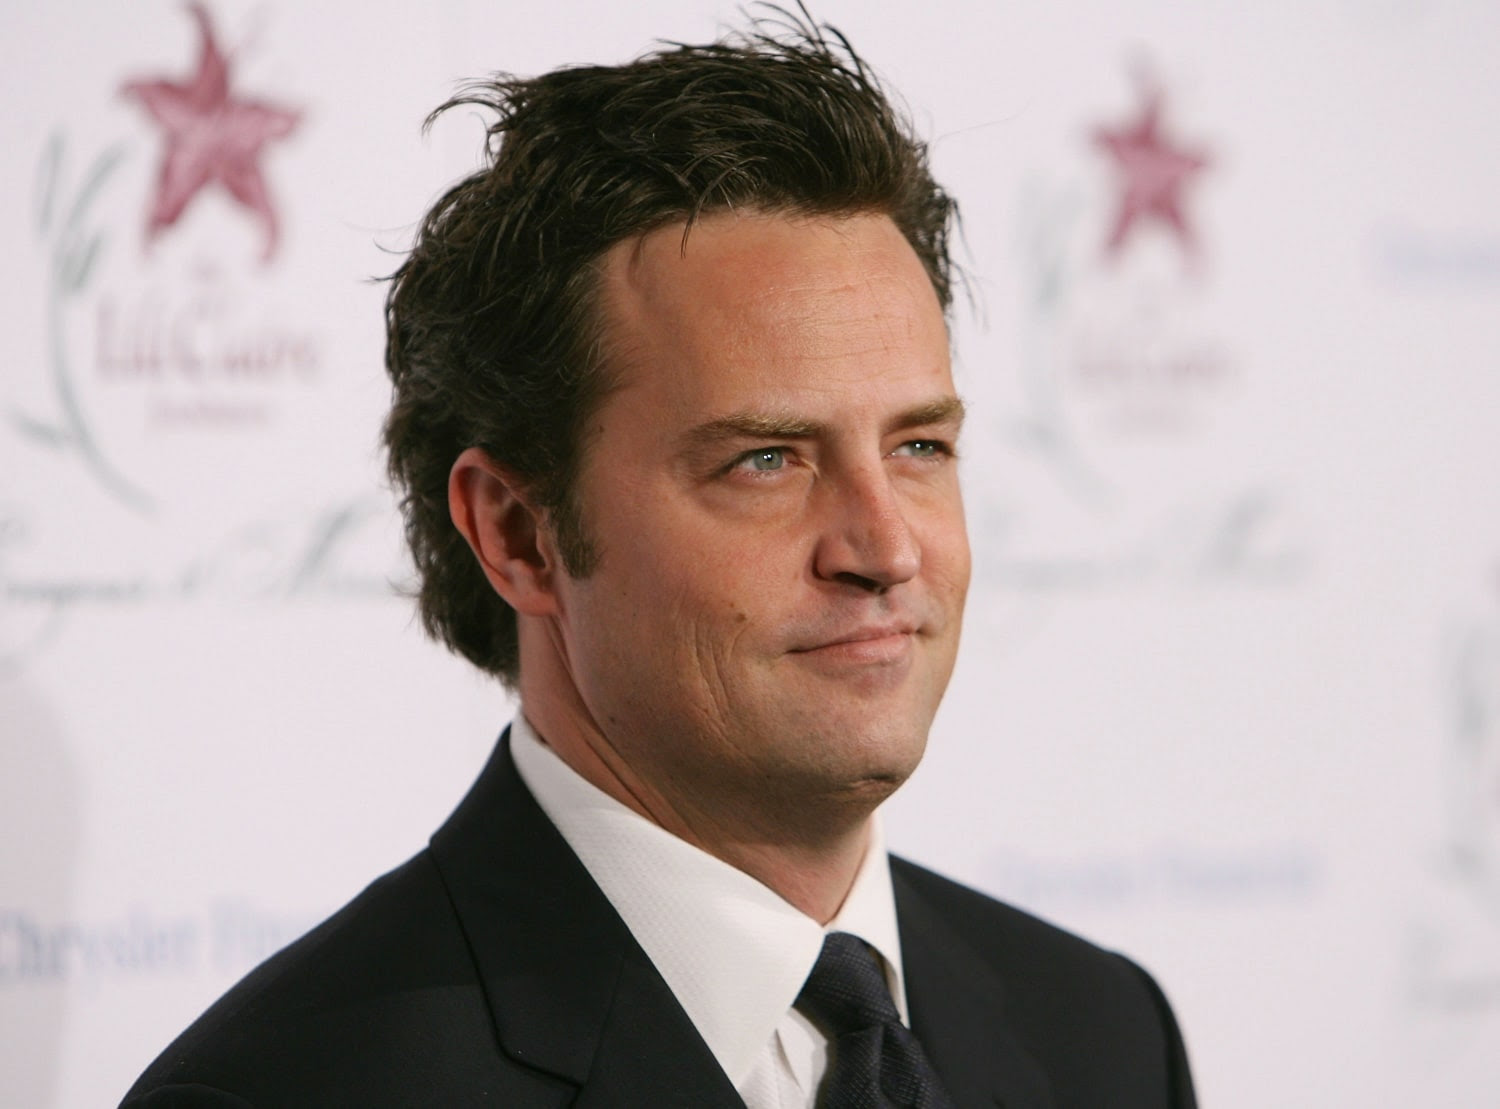 Co-stars and friends pay tribute to Matthew Perry, as autopsy results are inconclusive following his death at 54 Matthew-perry-bw-102823-c1f95b